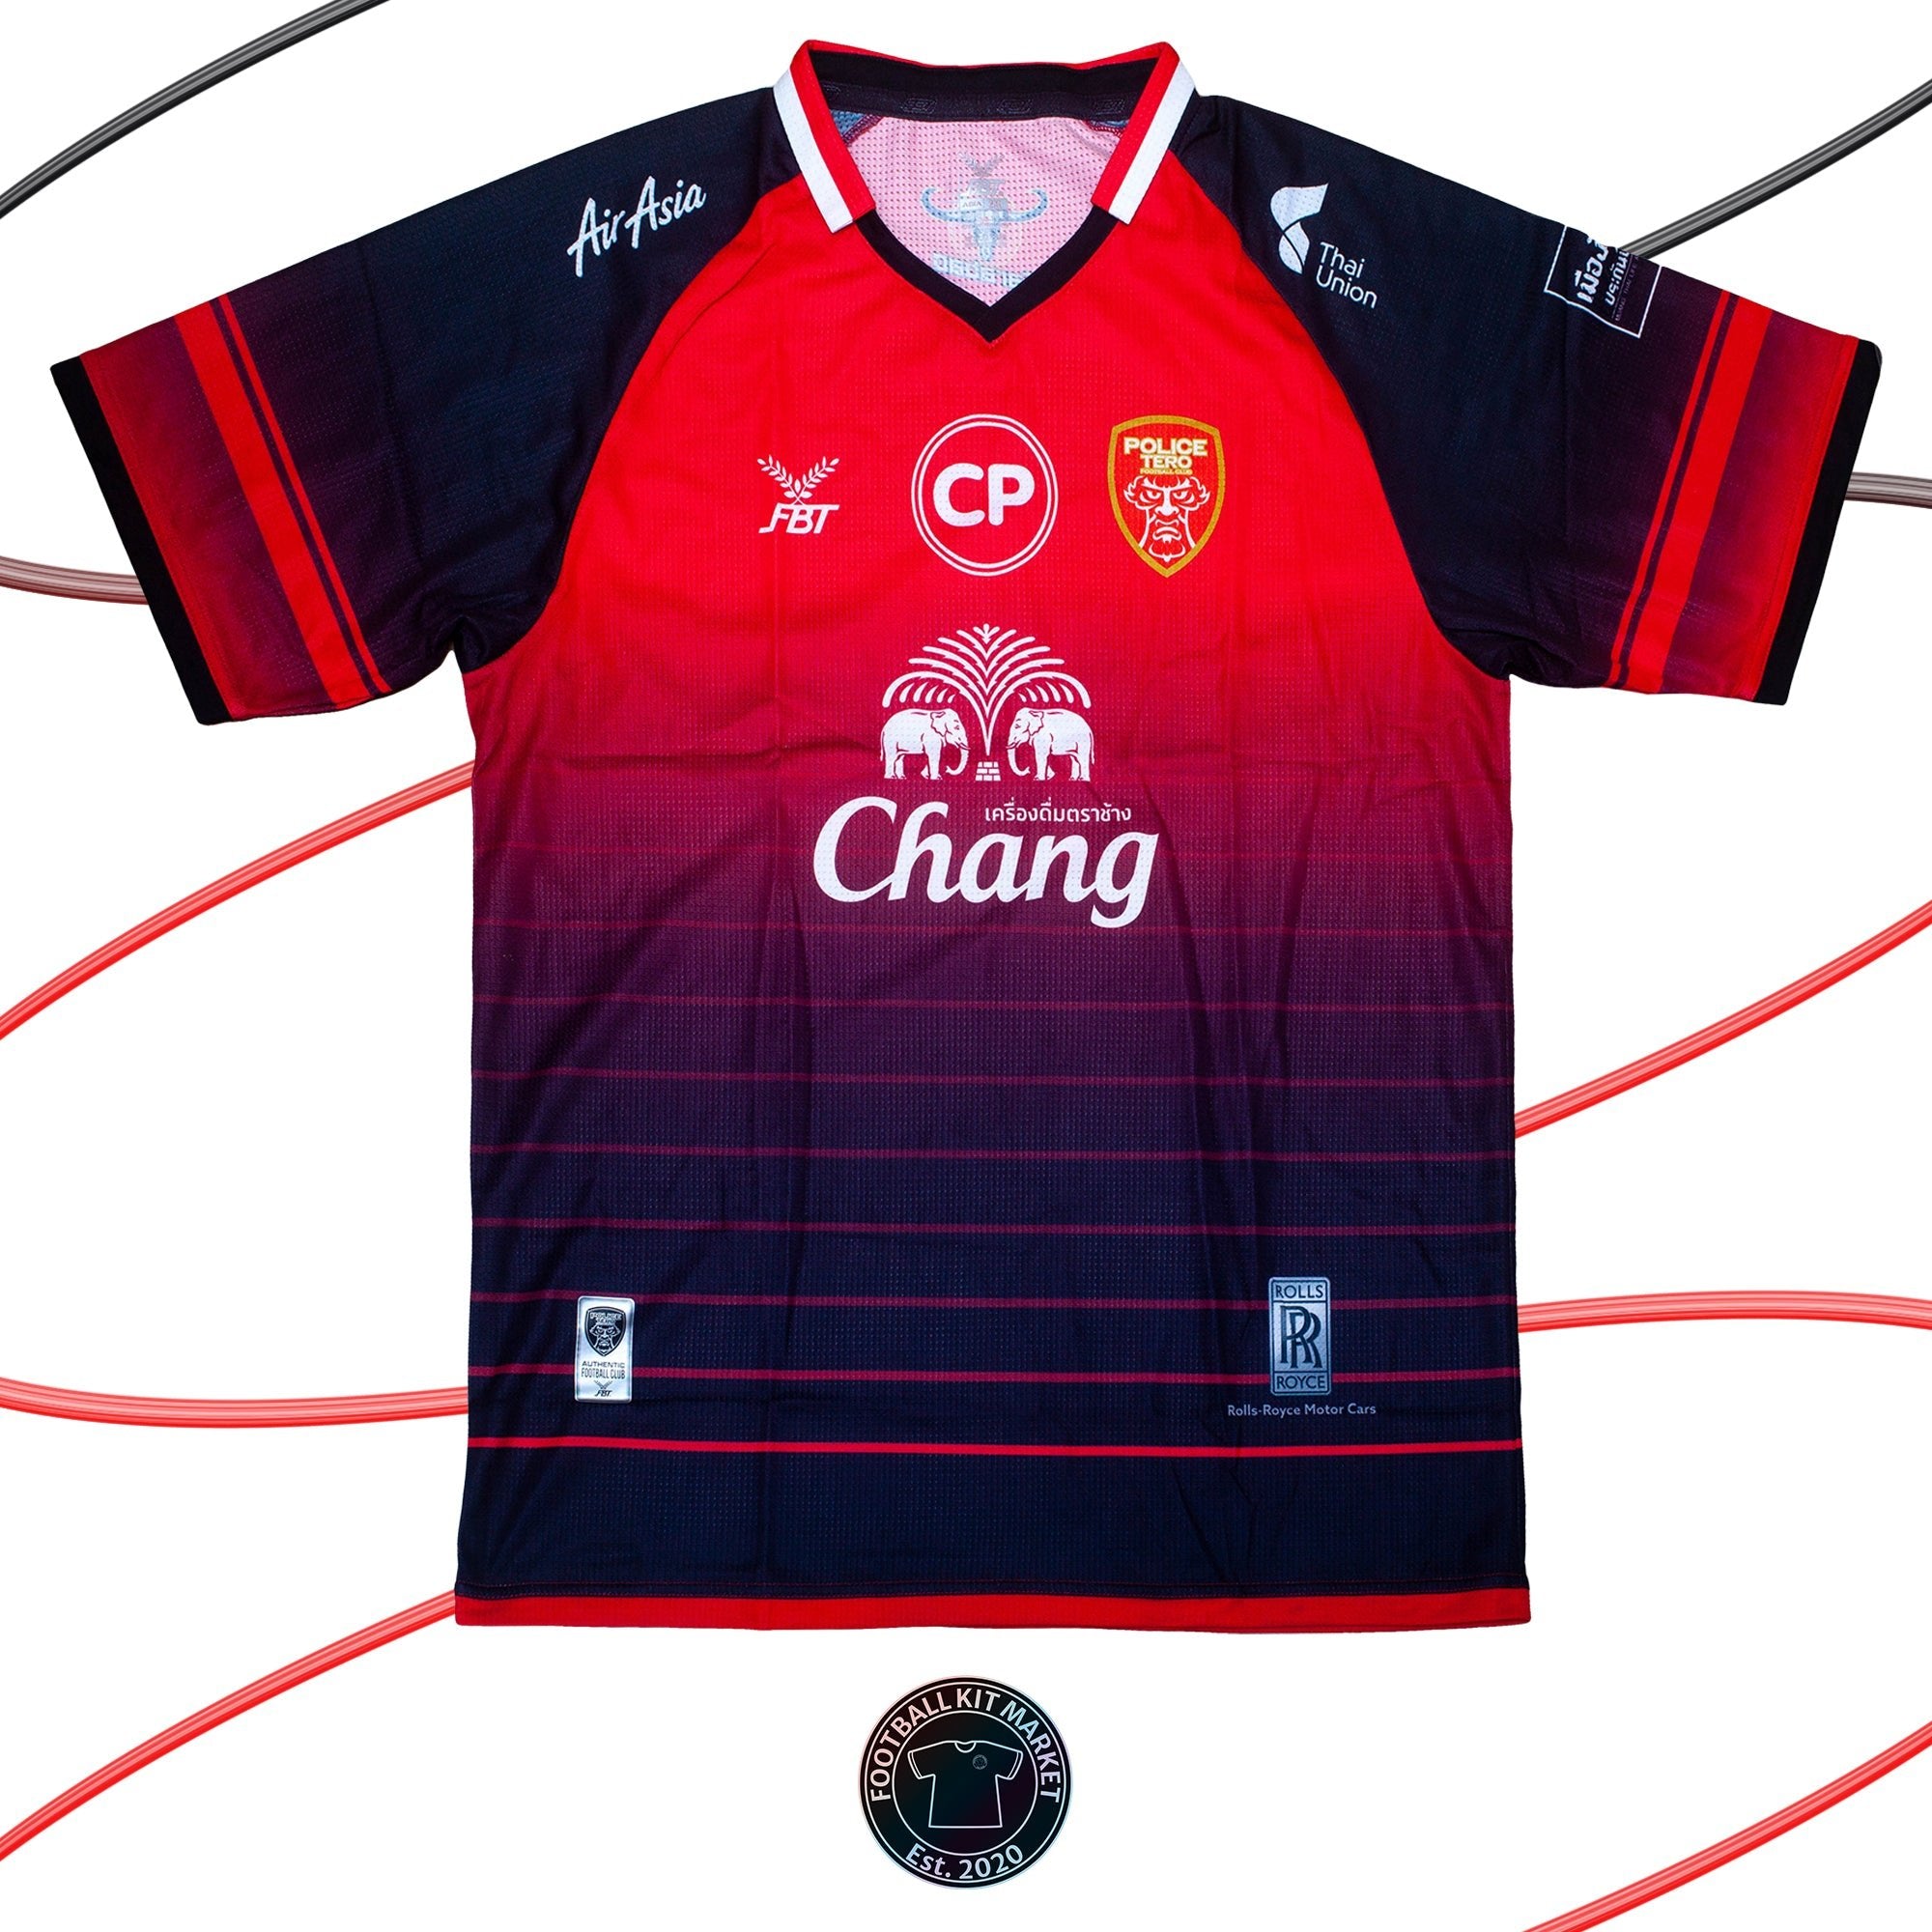 Genuine POLICE TERO Home Shirt (2018-2019) - FBT (XXL) - Product Image from Football Kit Market